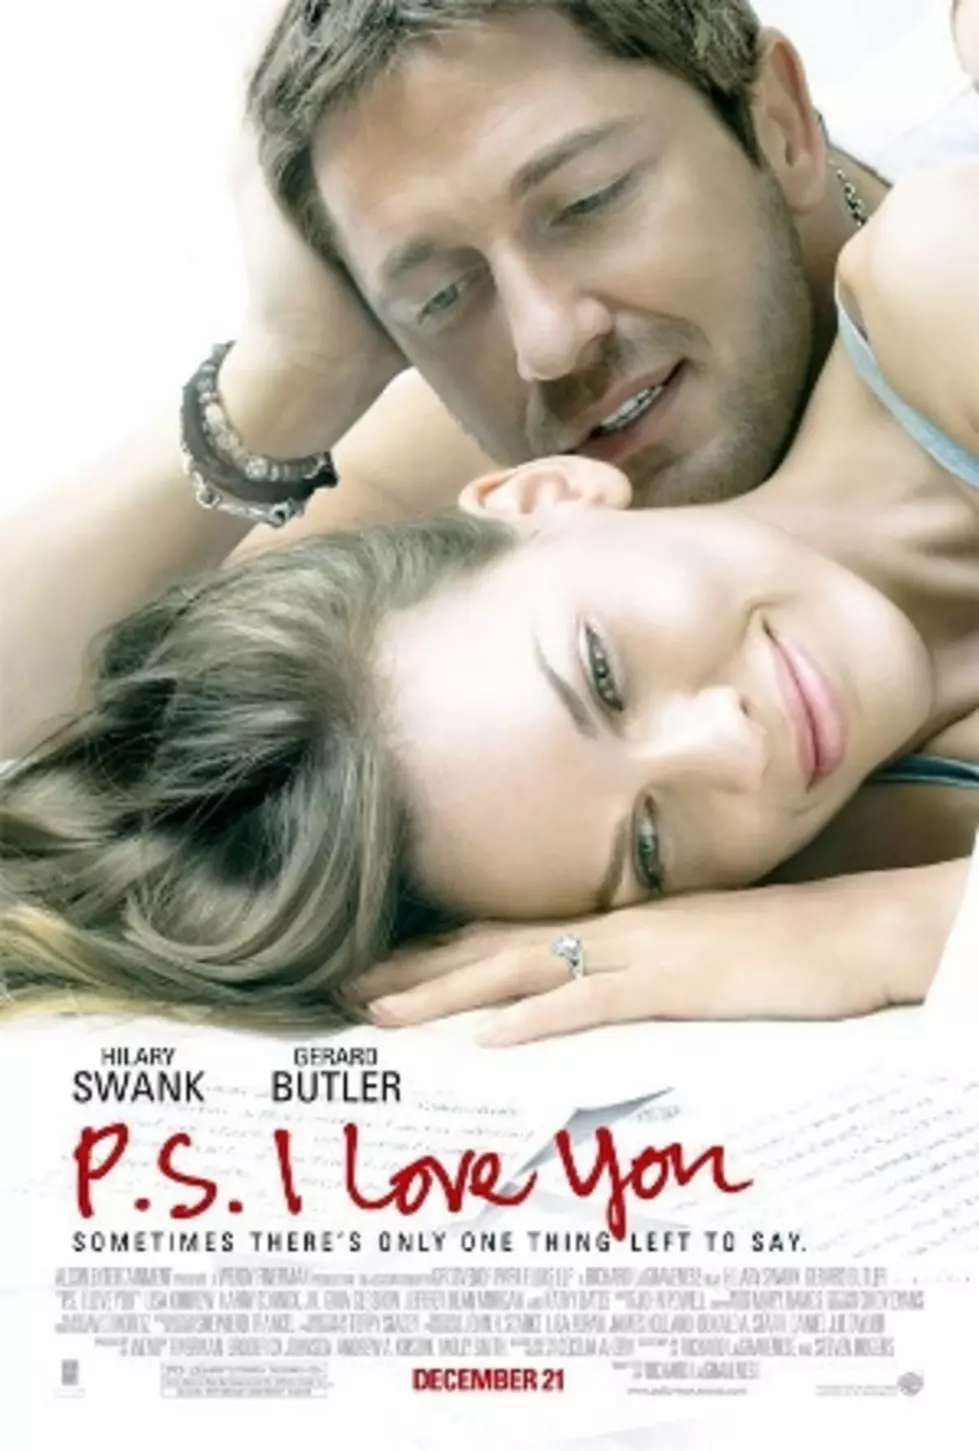 Watch &#8216;P.S. I Love You&#8217; At The Pines Theater For A Good Cause